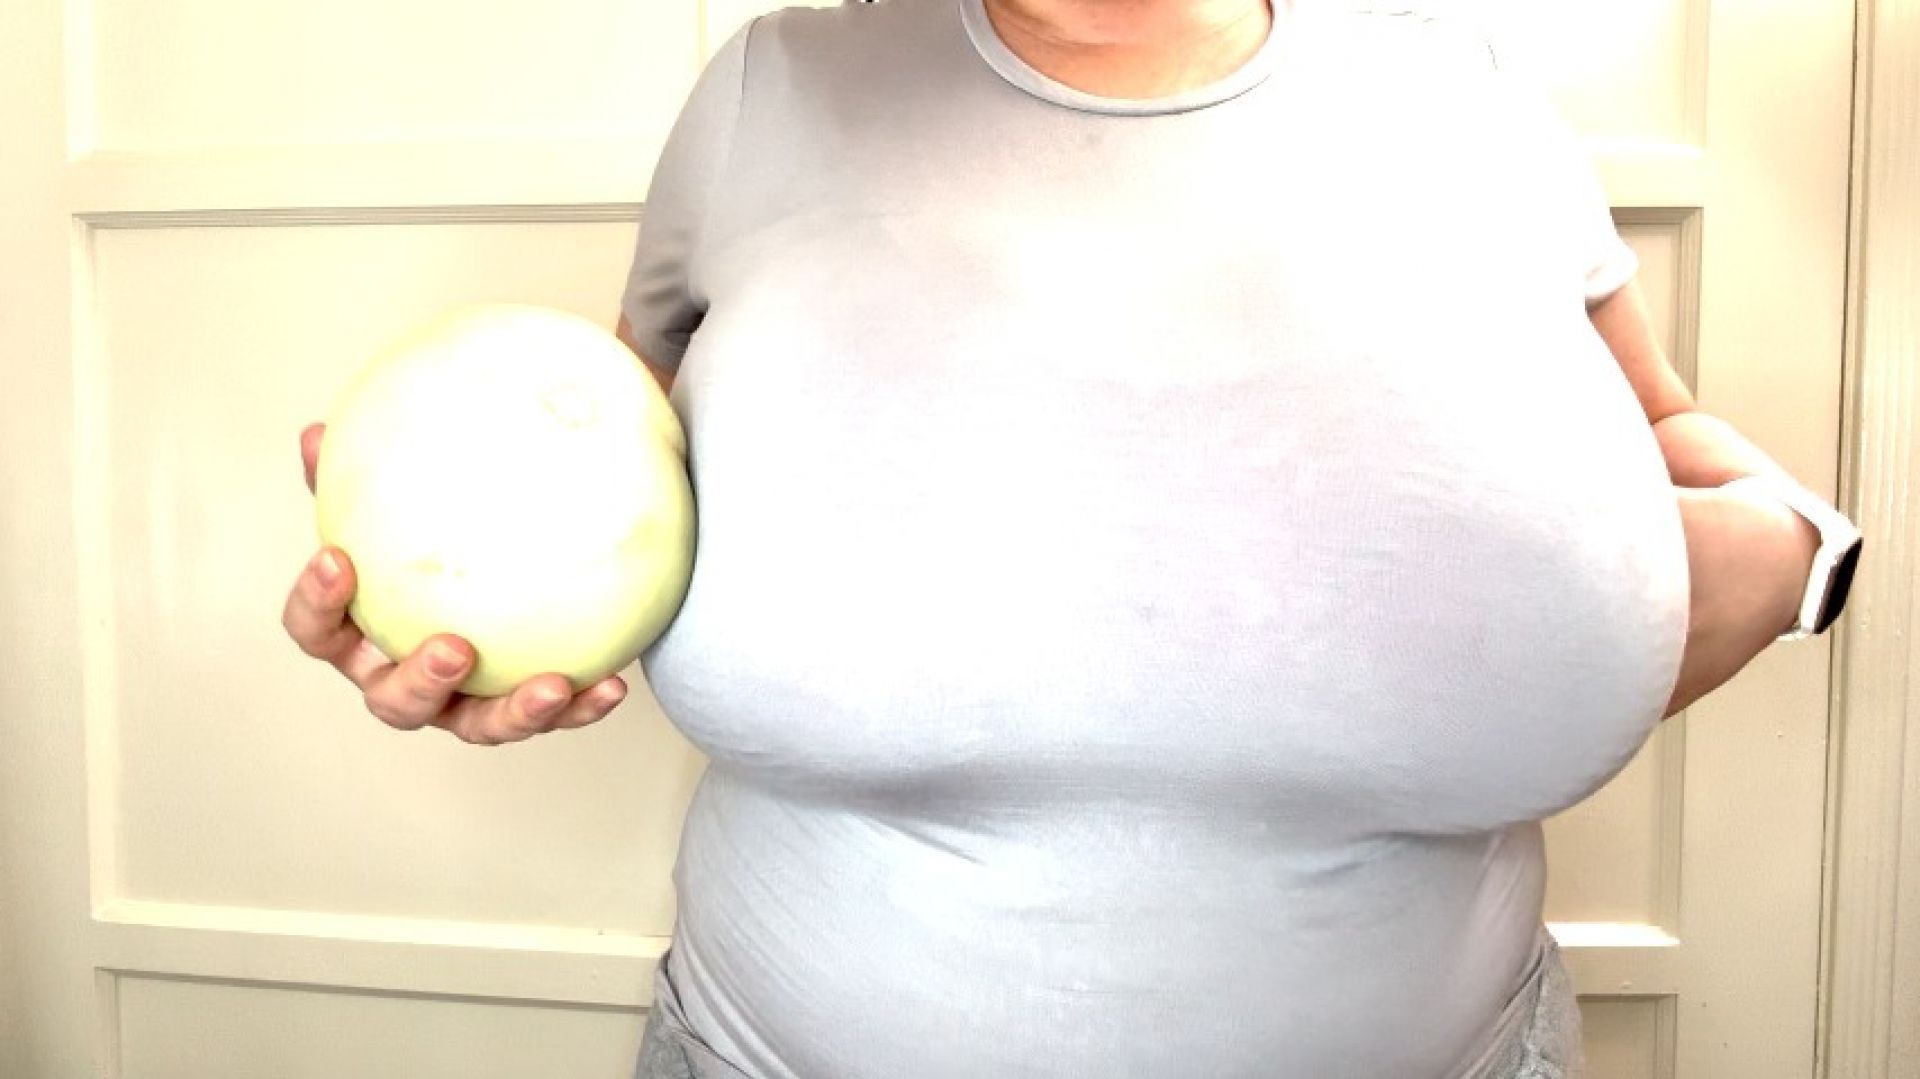 HUGE TITS comparing melons to melons